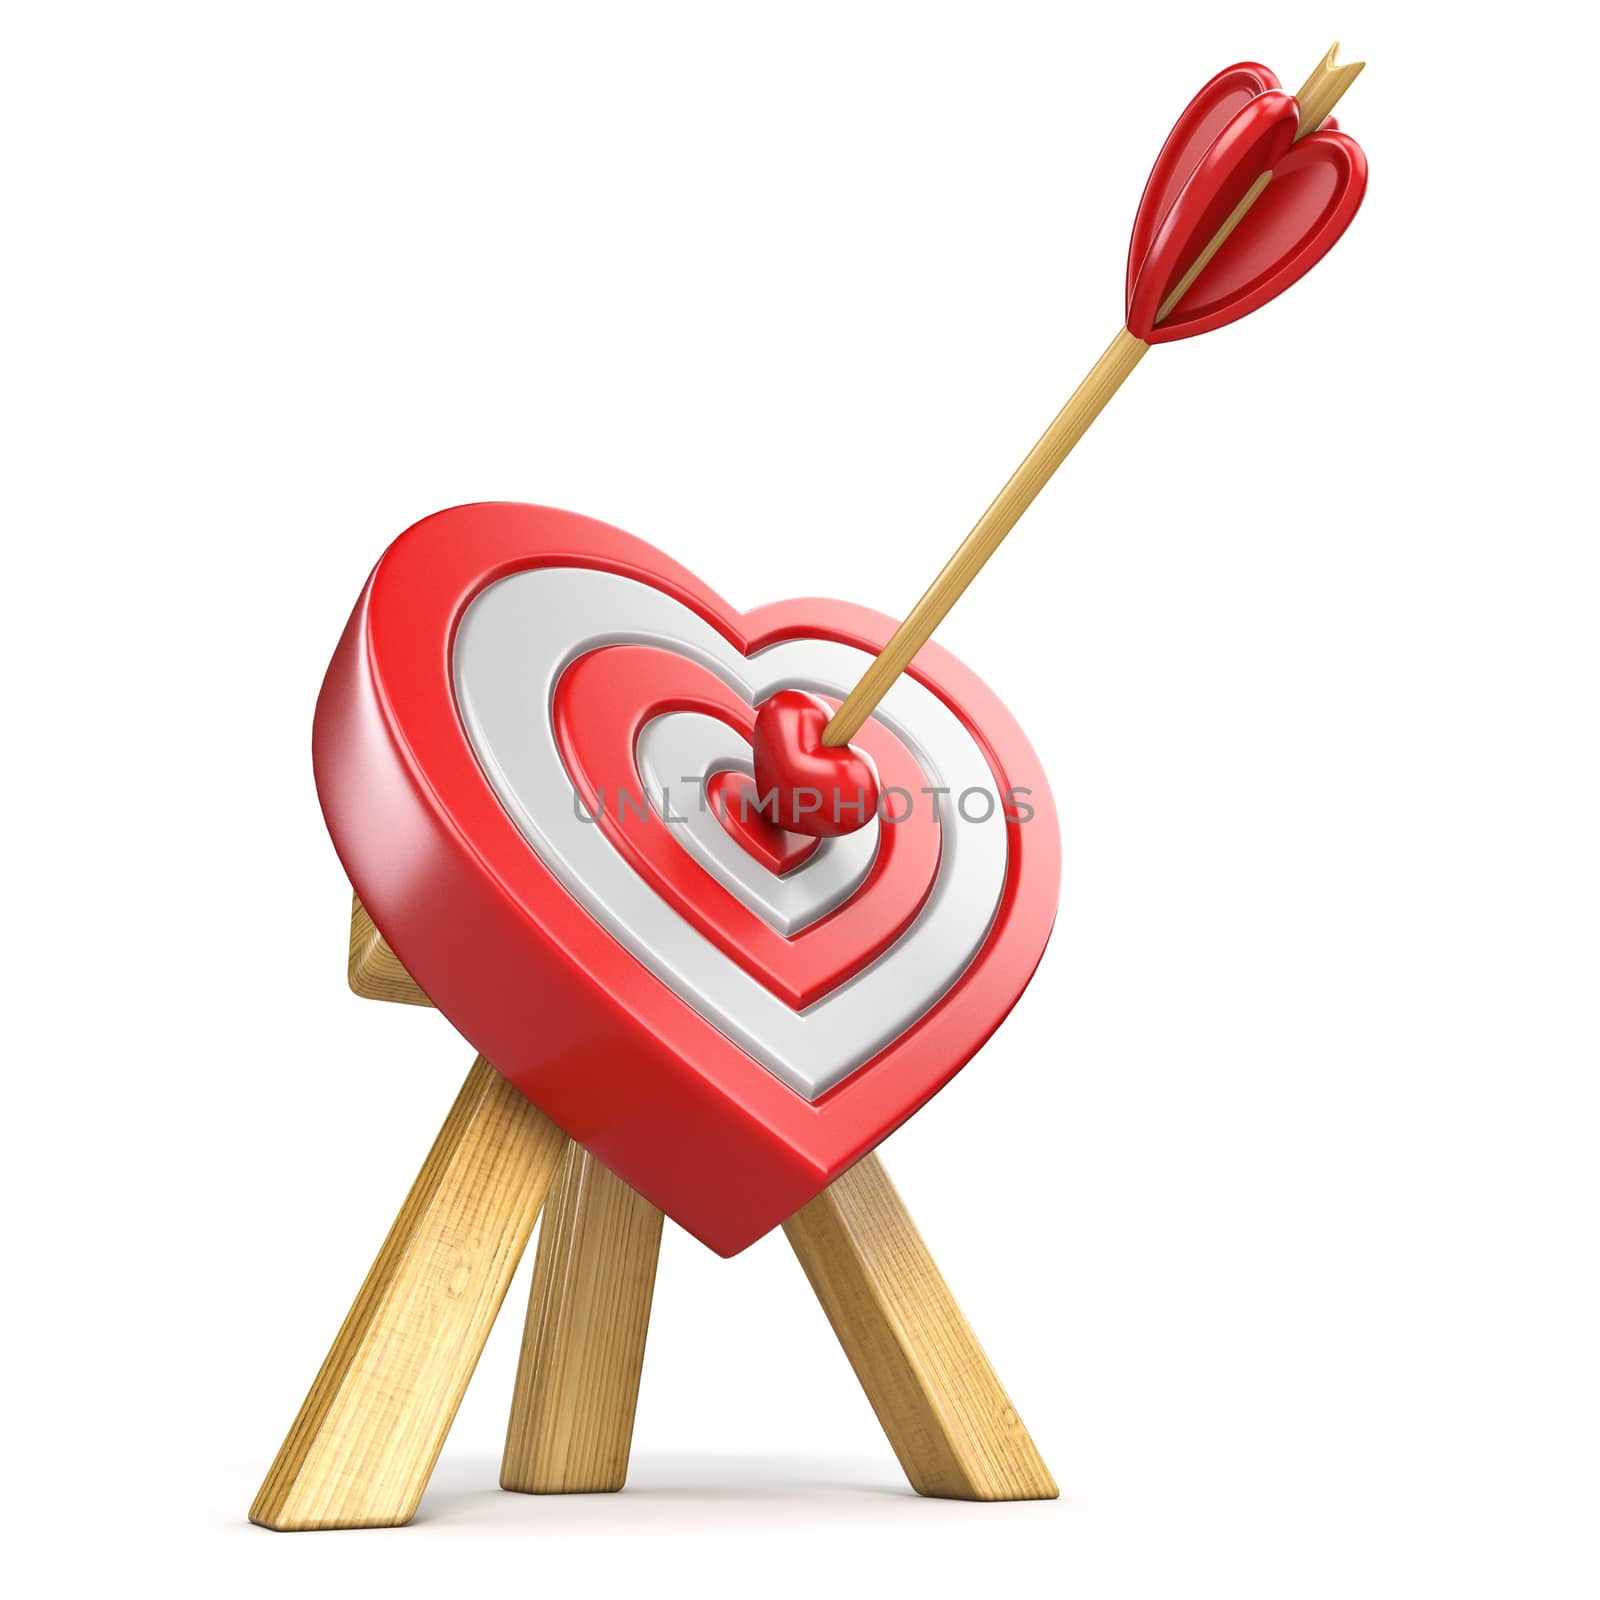 Heart shaped target with the arrow in the center 3D render illustration isolated on white background